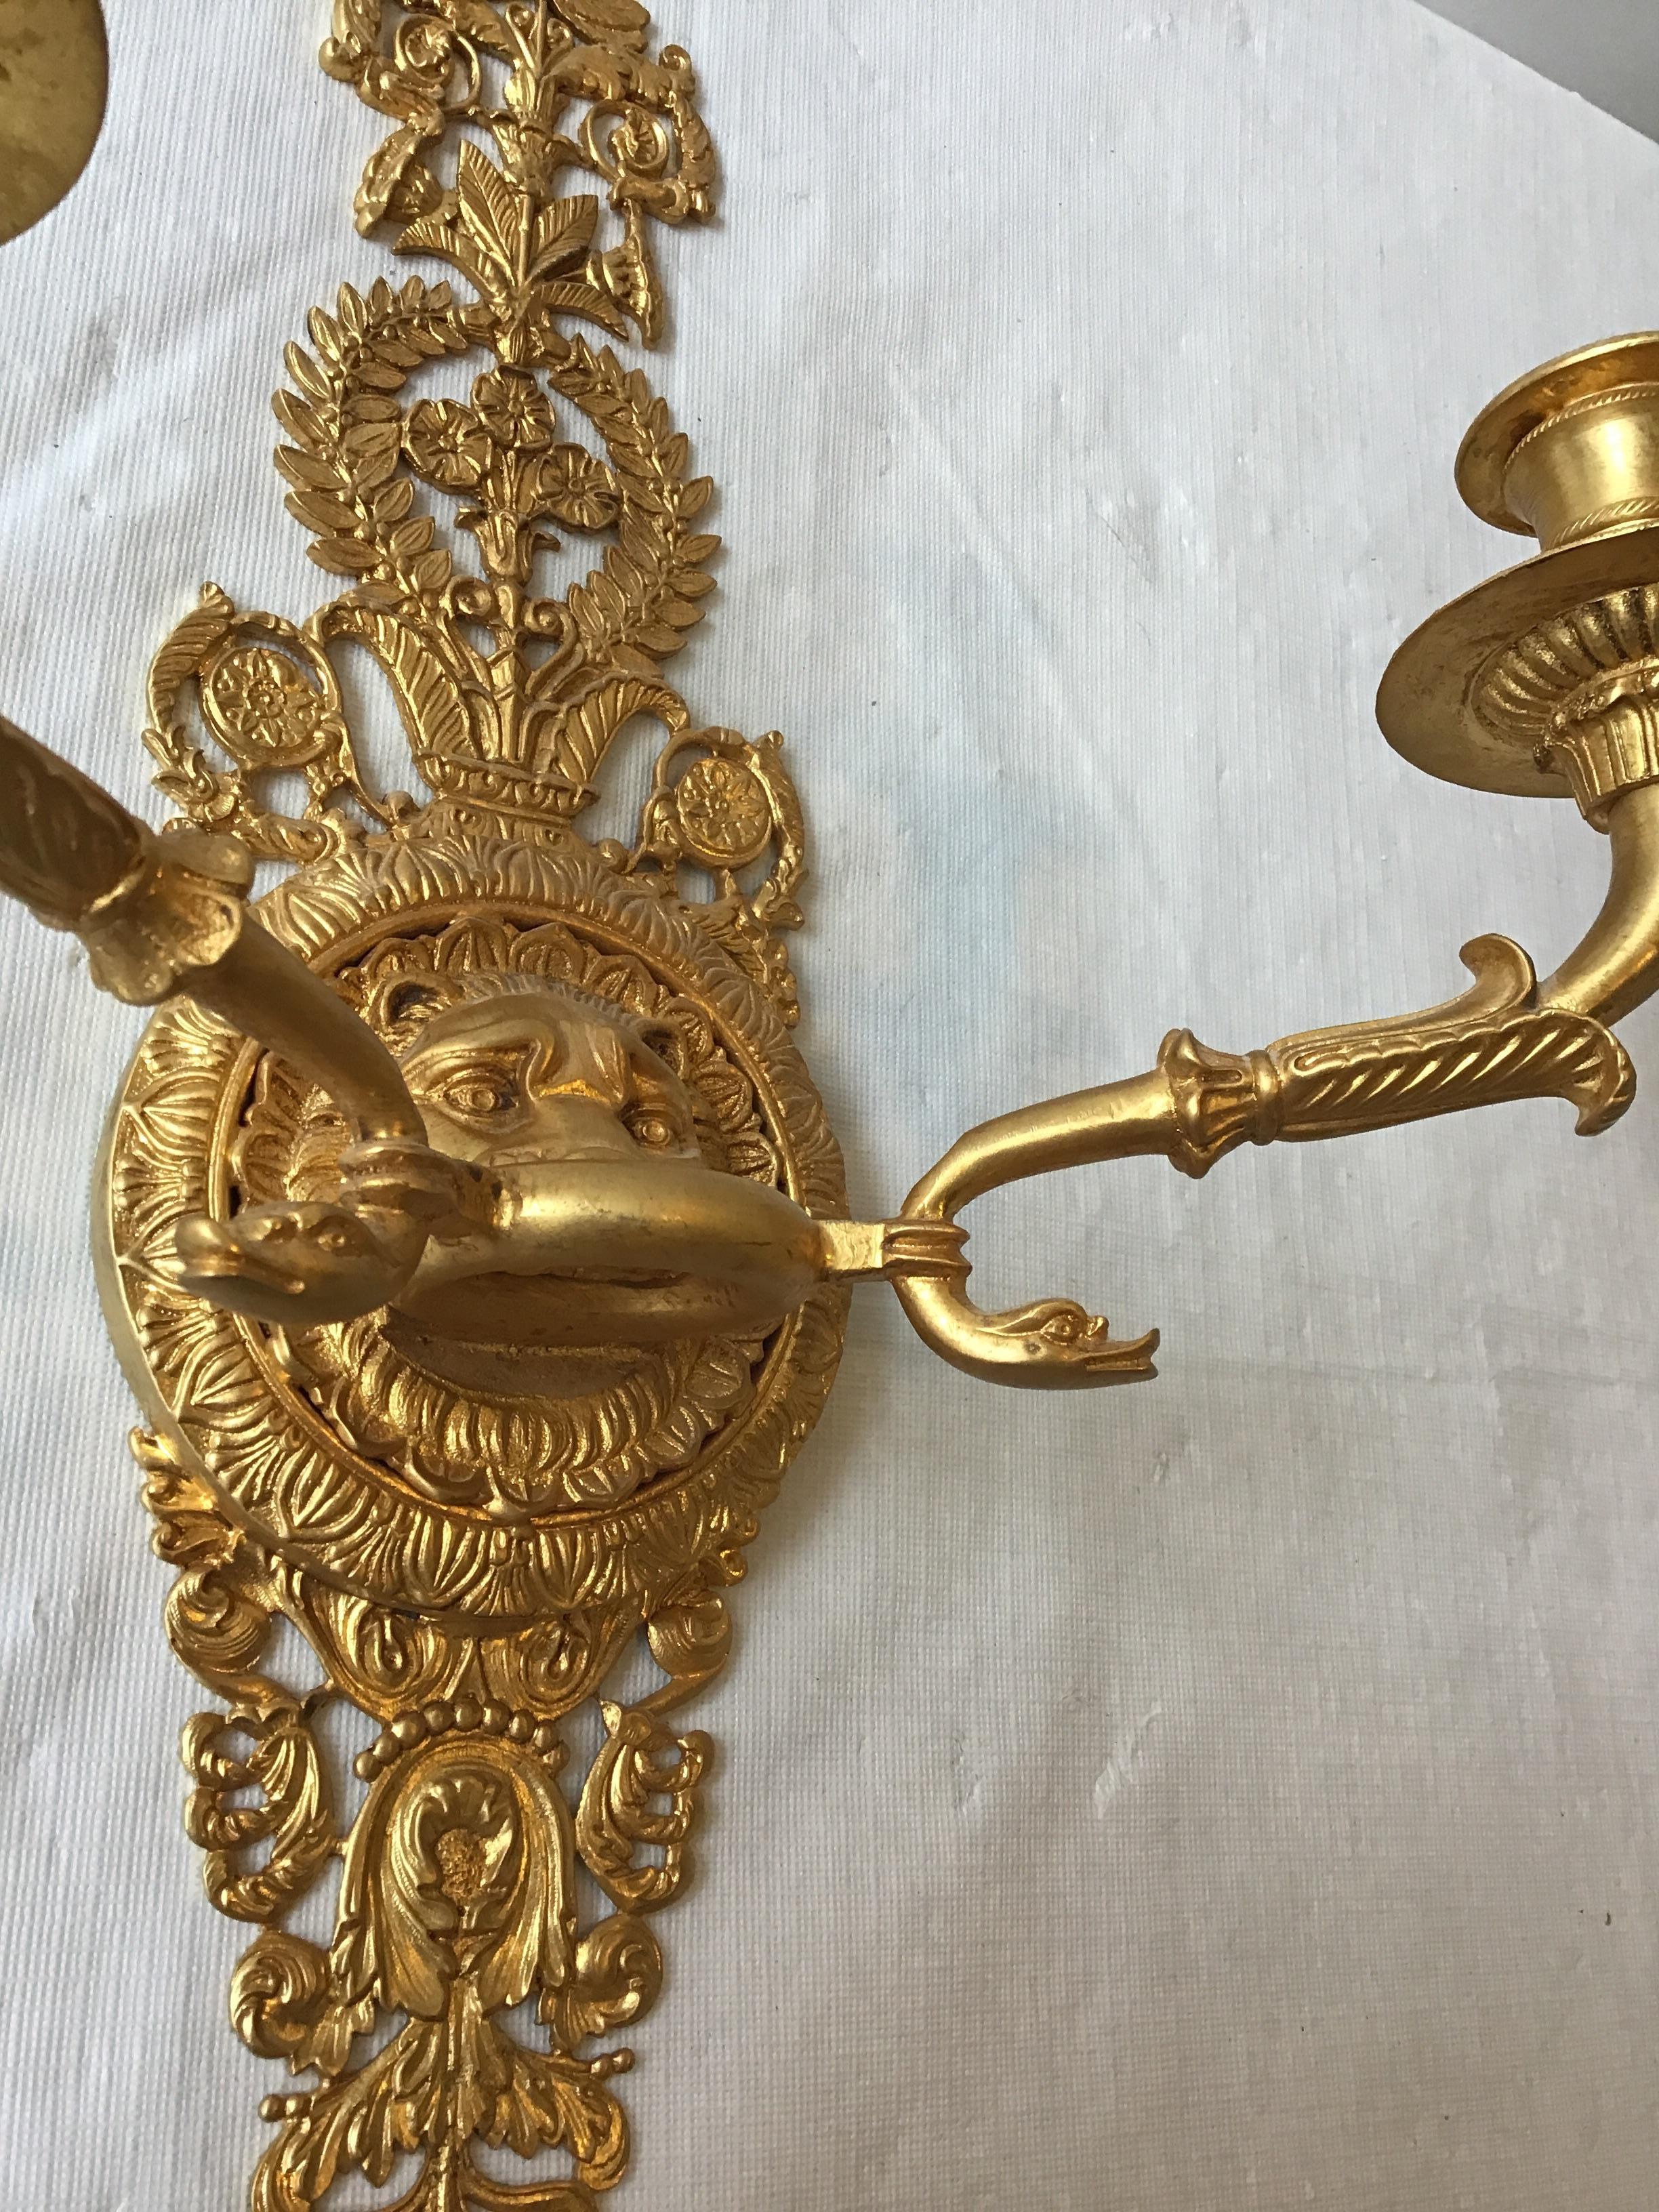 3 Versace Style Gold-Plated Lion Head Classical Sconces For Sale 2